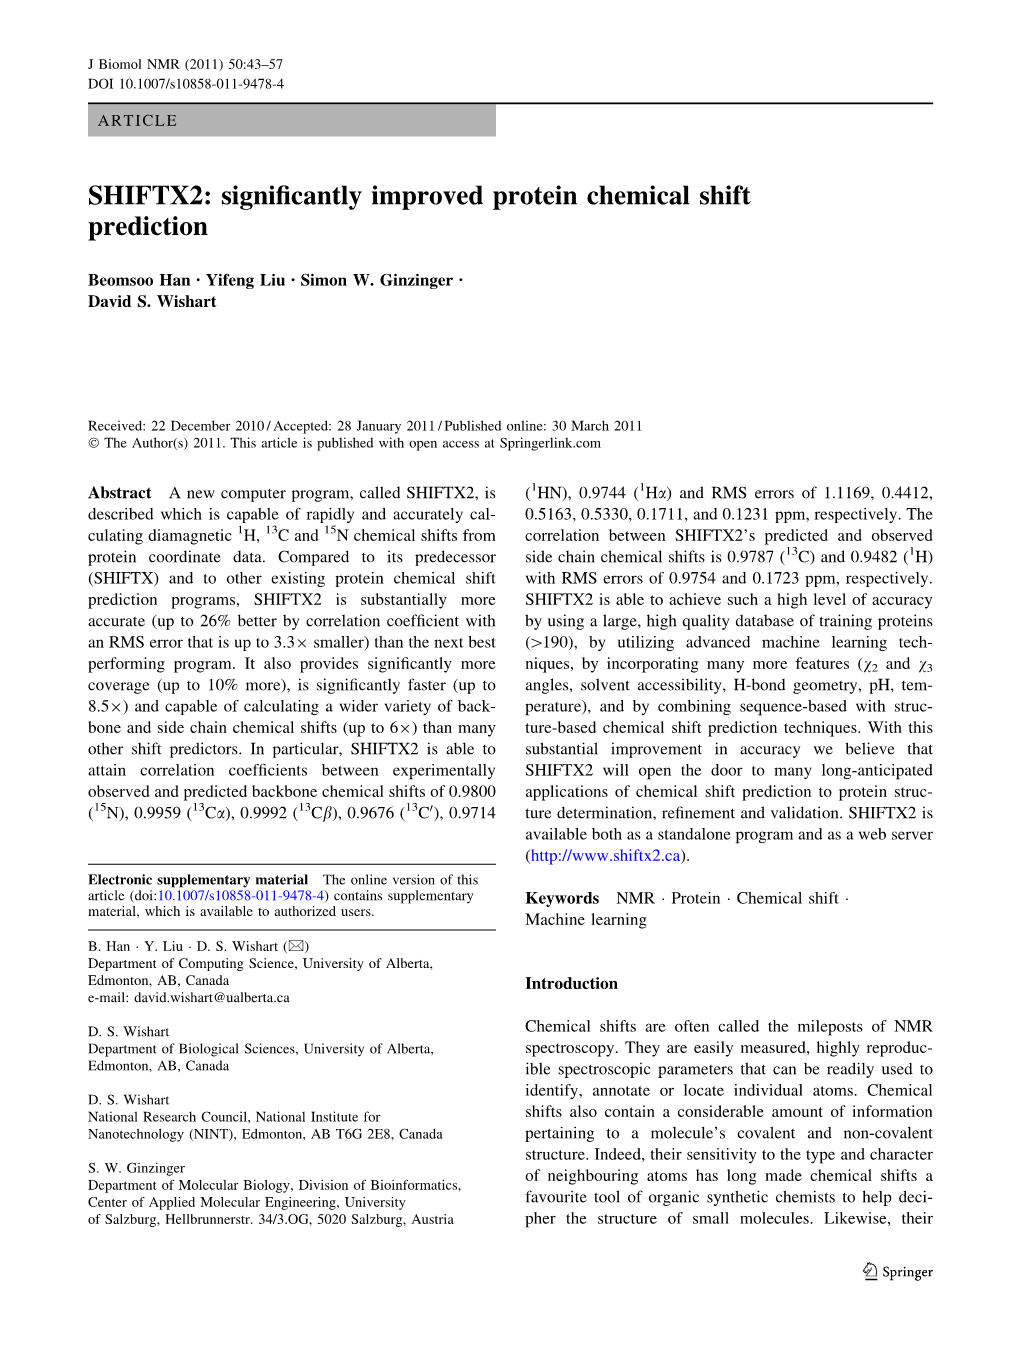 SHIFTX2: Significantly Improved Protein Chemical Shift Prediction